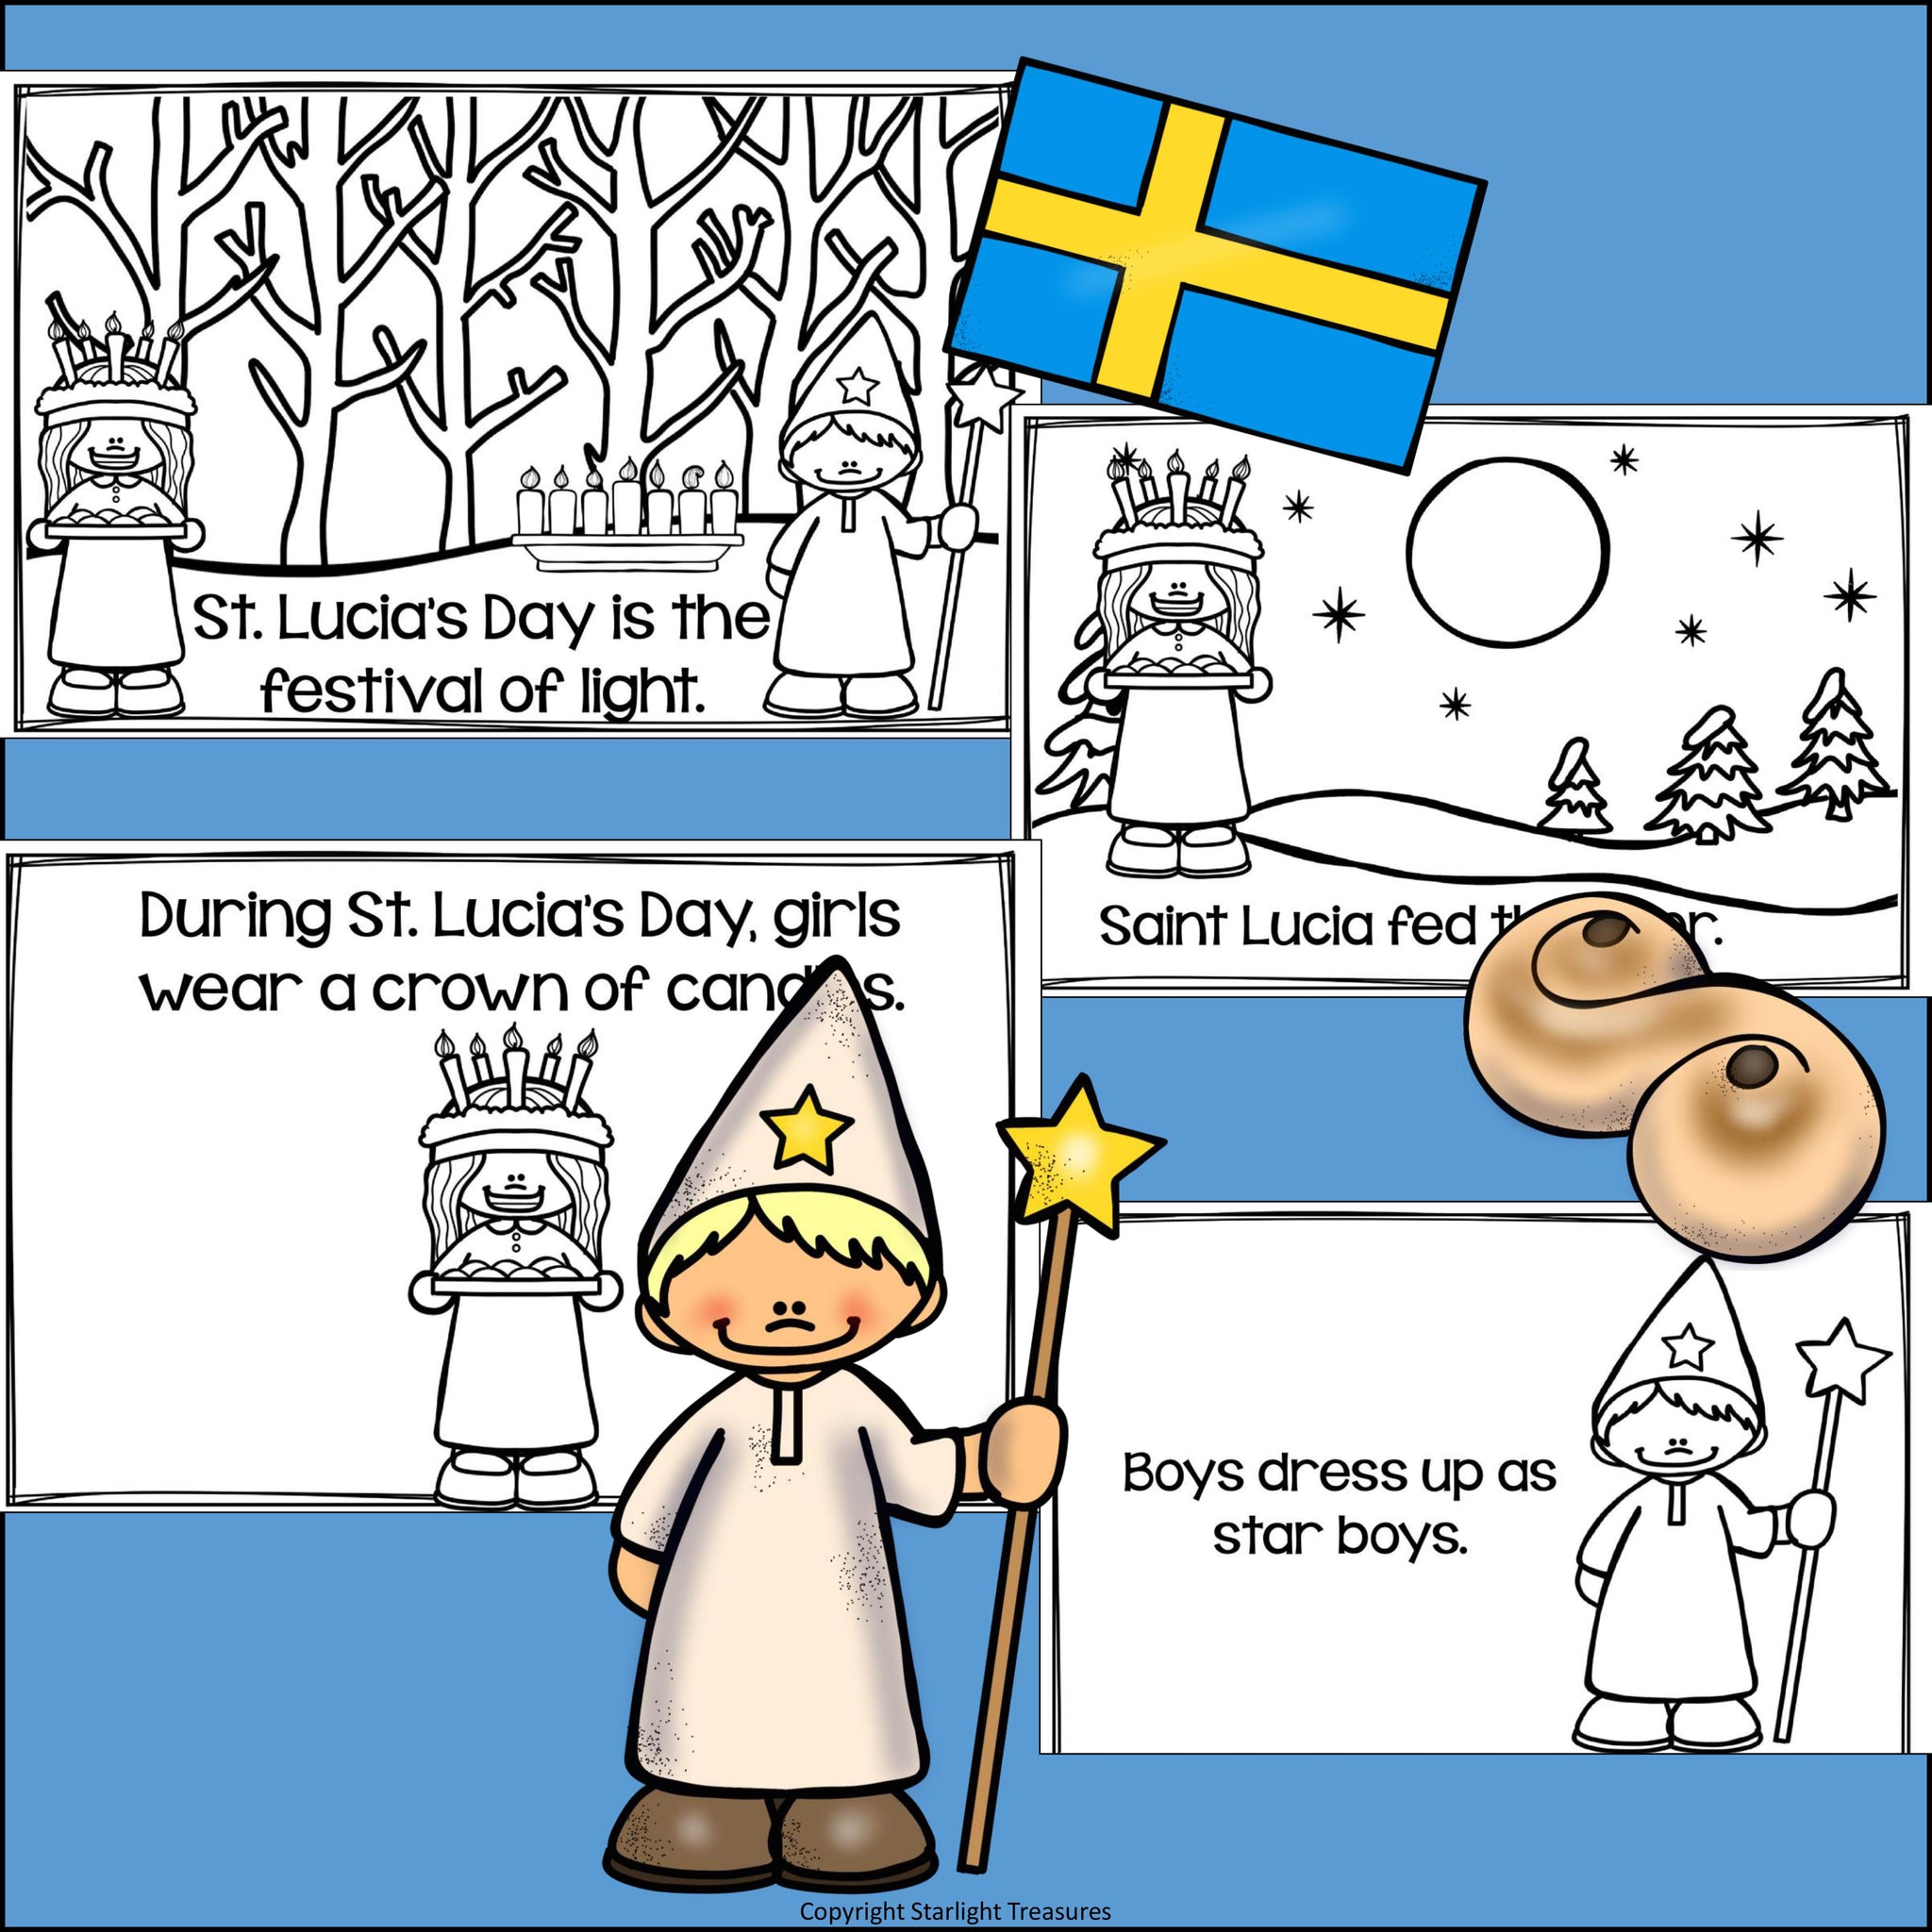 Christmas in sweden st lucias day mini book for early readers â starlight treasures llc